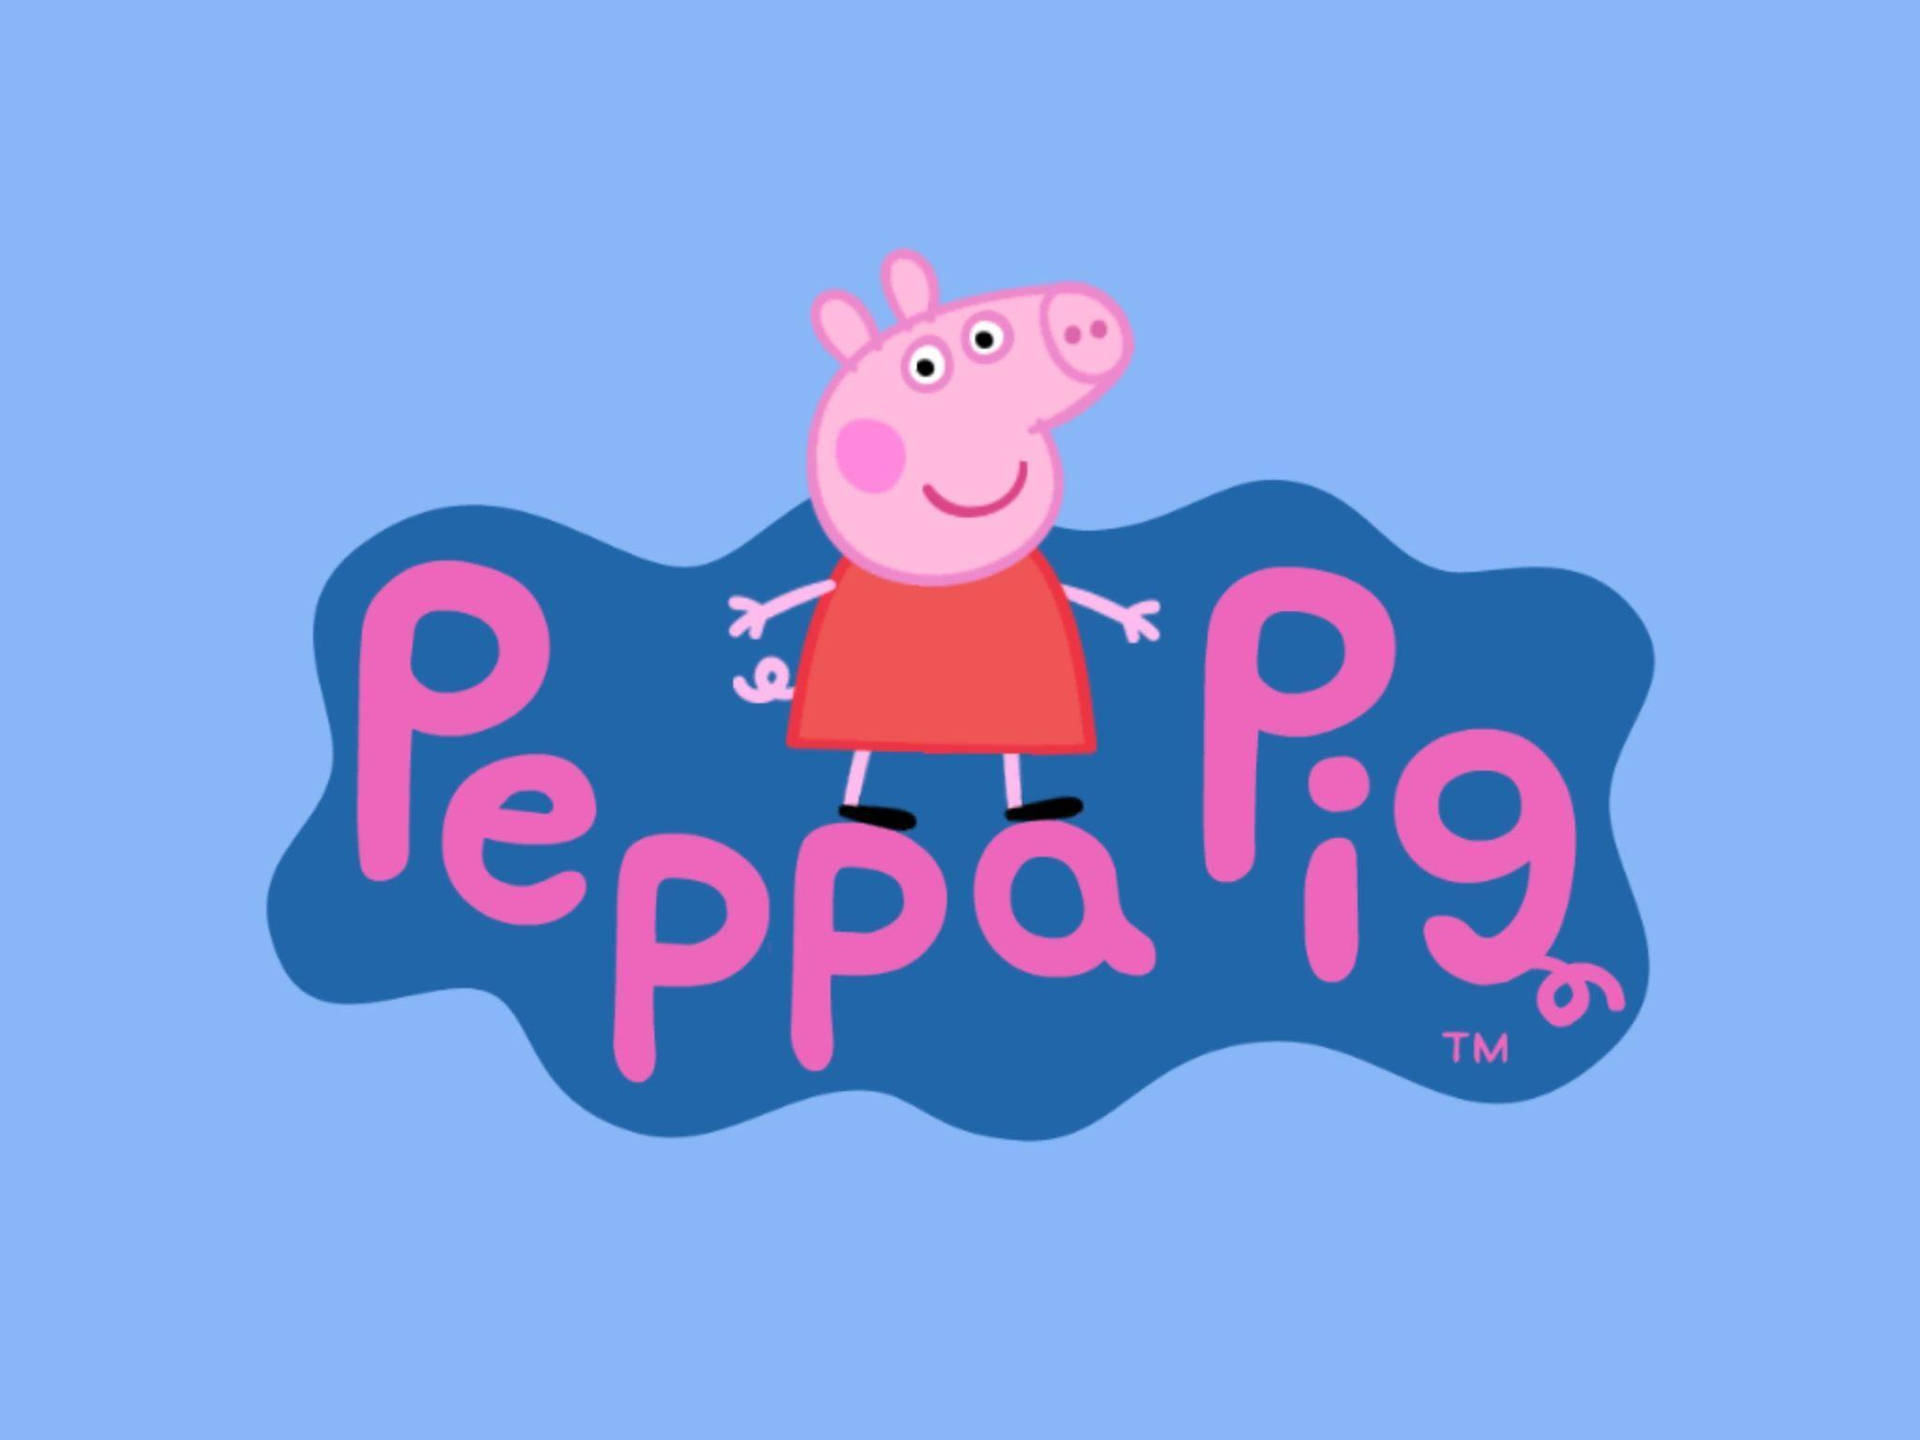 Adorable And Colorful Peppa Pig Tablet Design